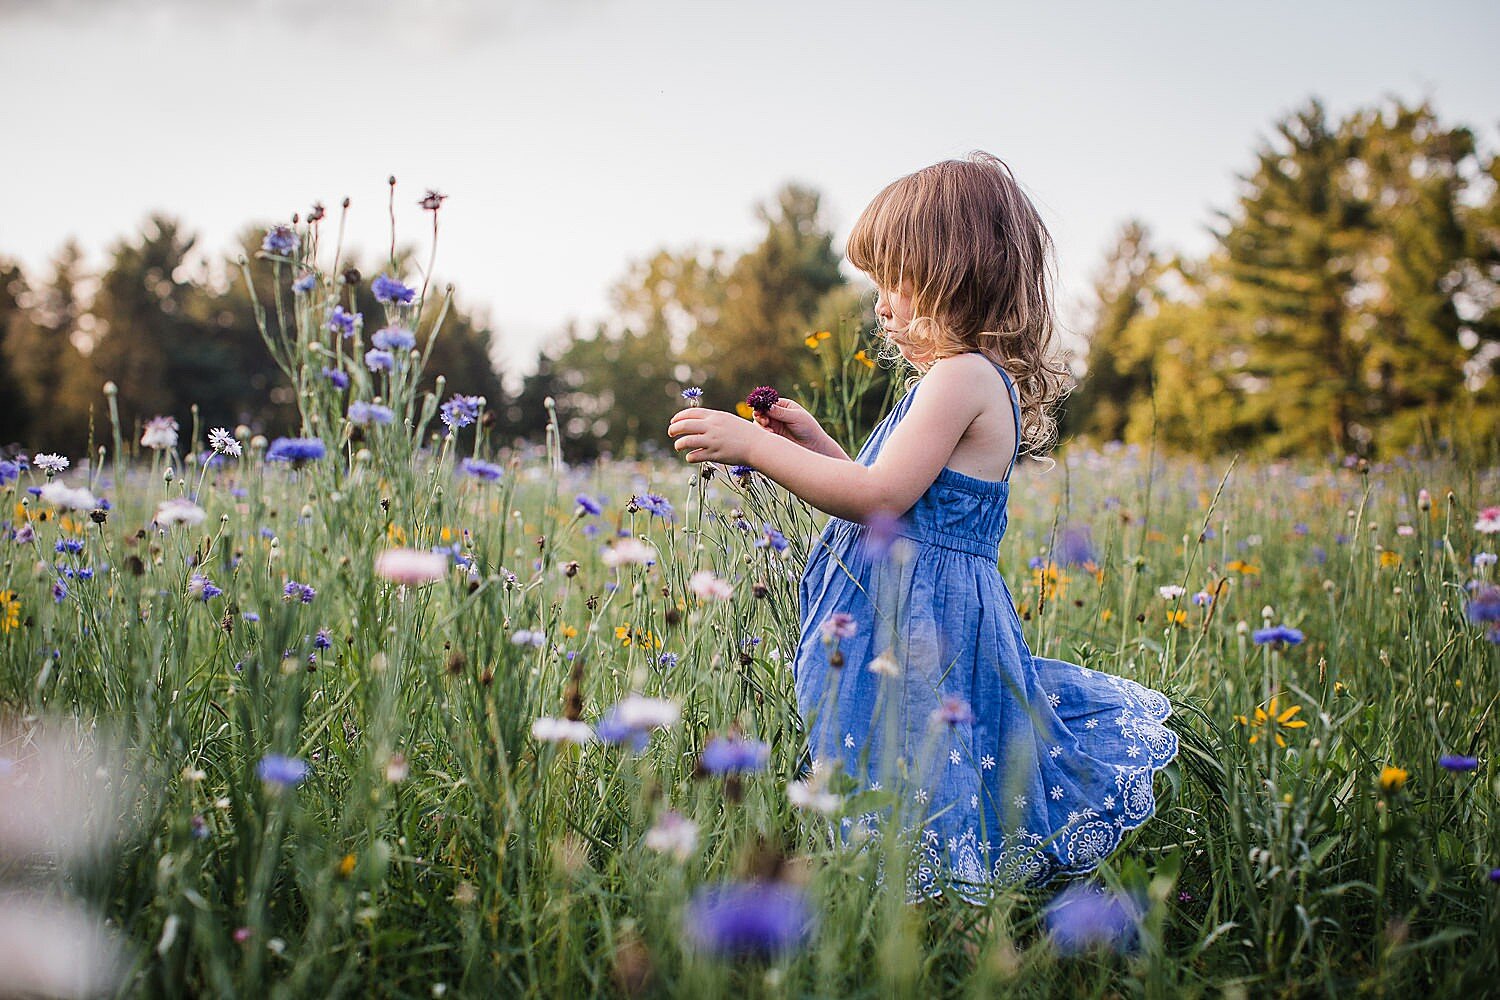 Colorful summer girl in a wildflower field